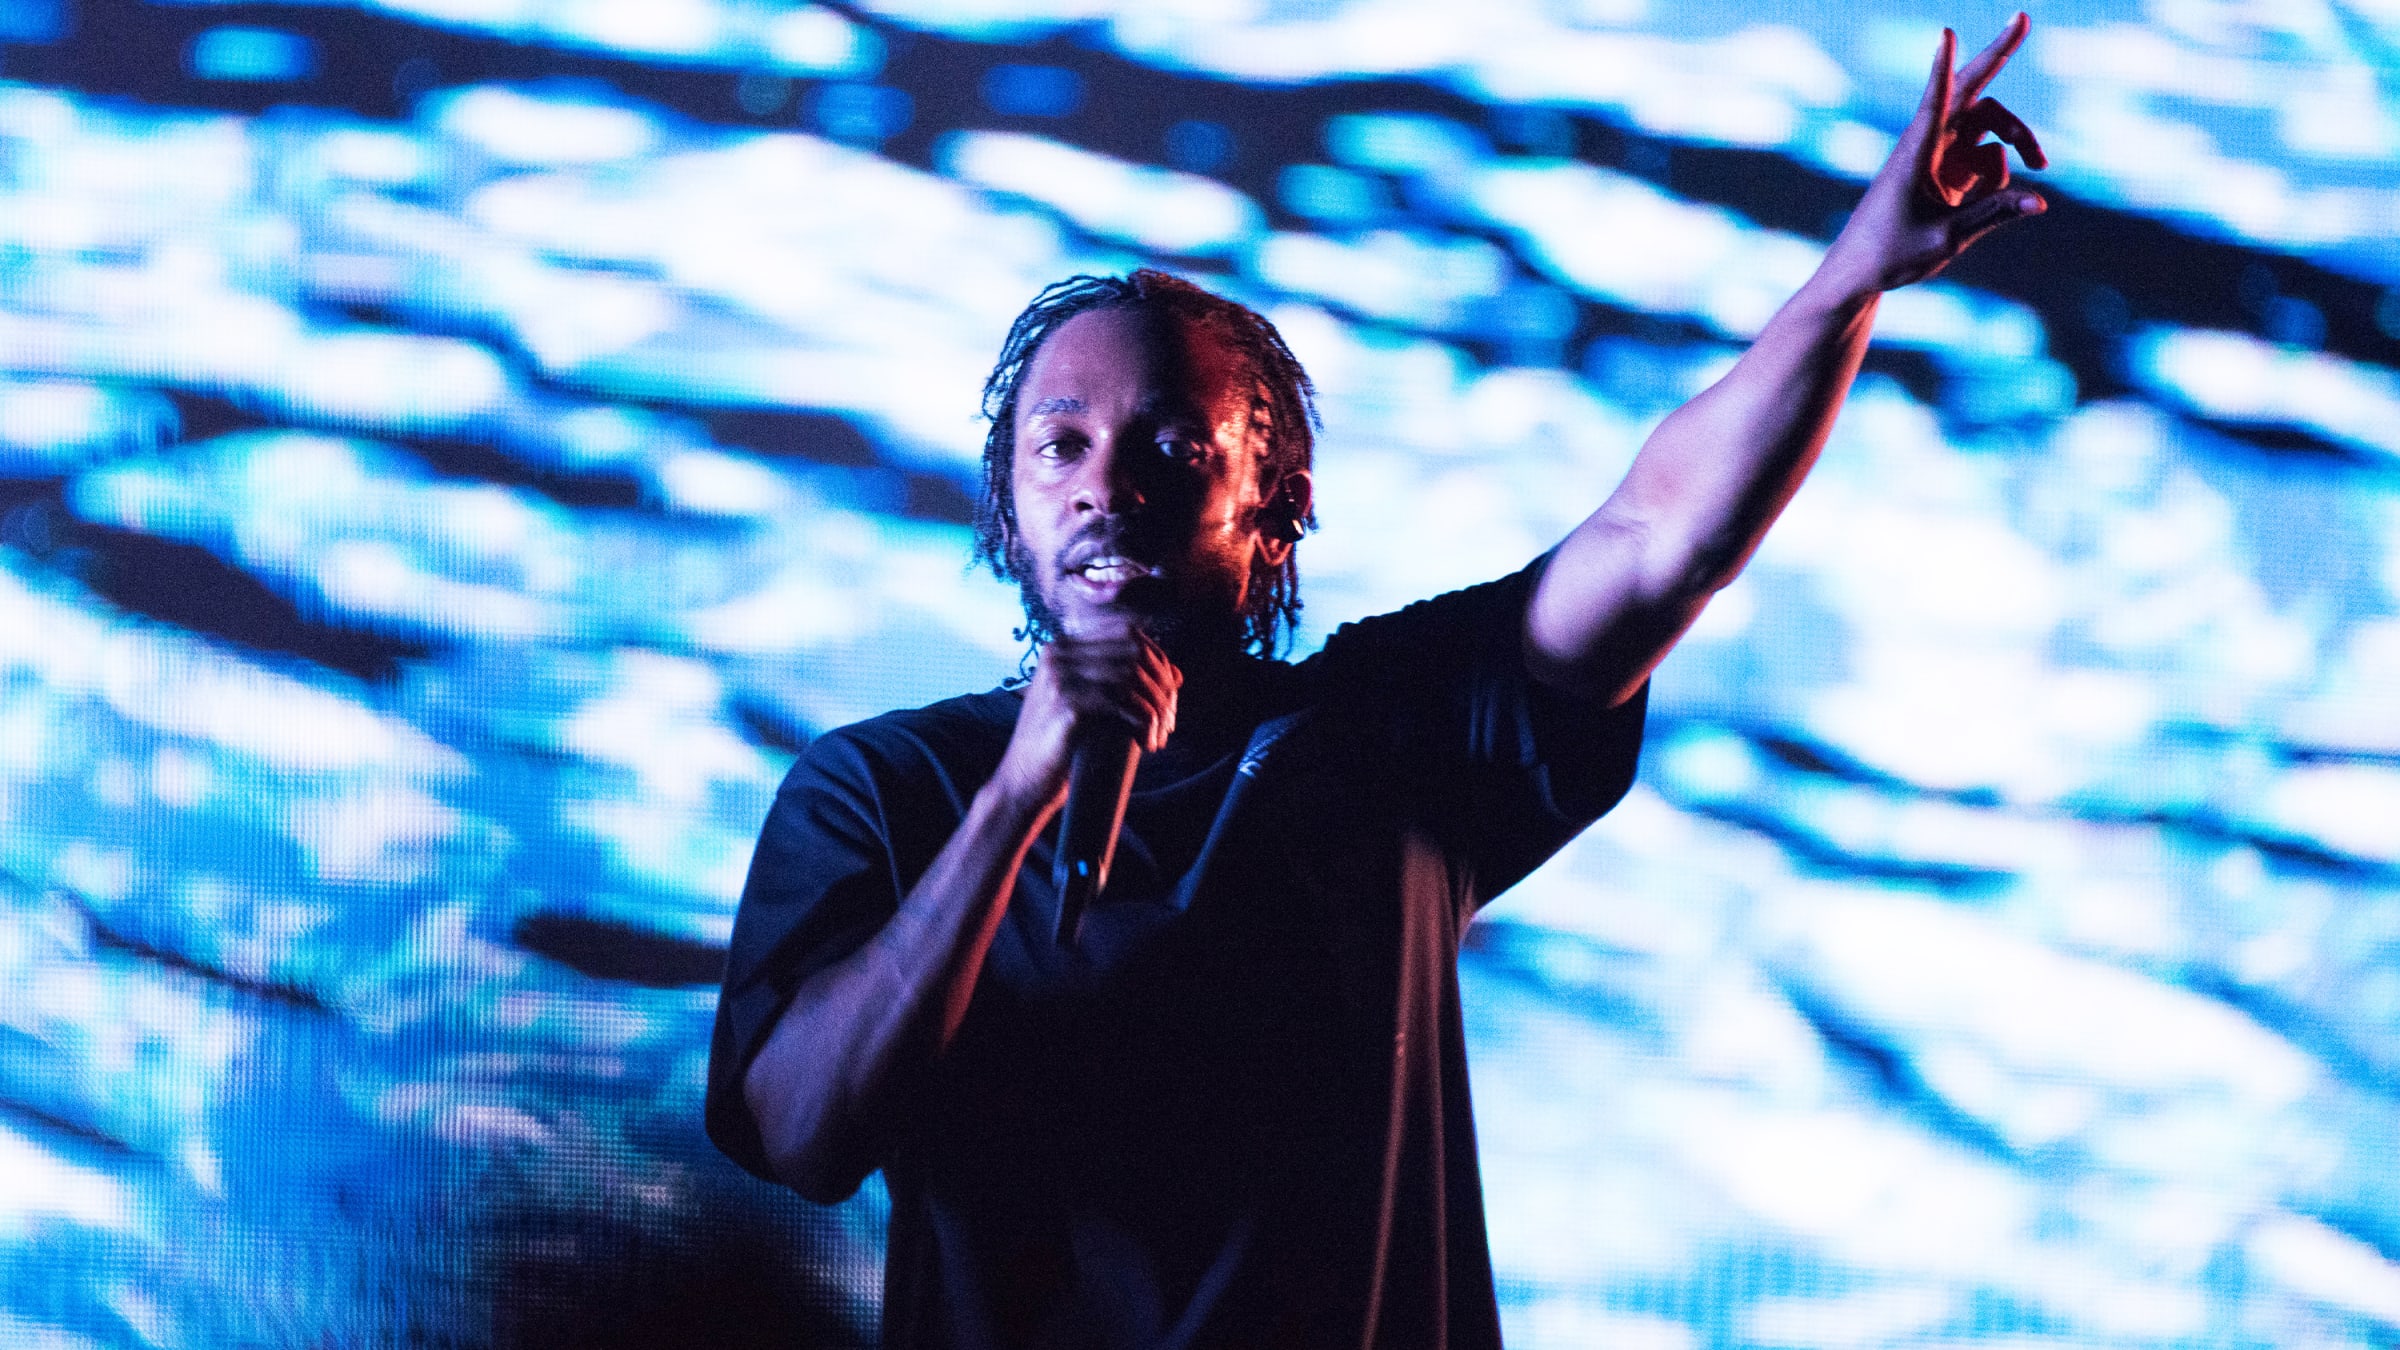 Kendrick Lamar has a love story with rich old lady clothes